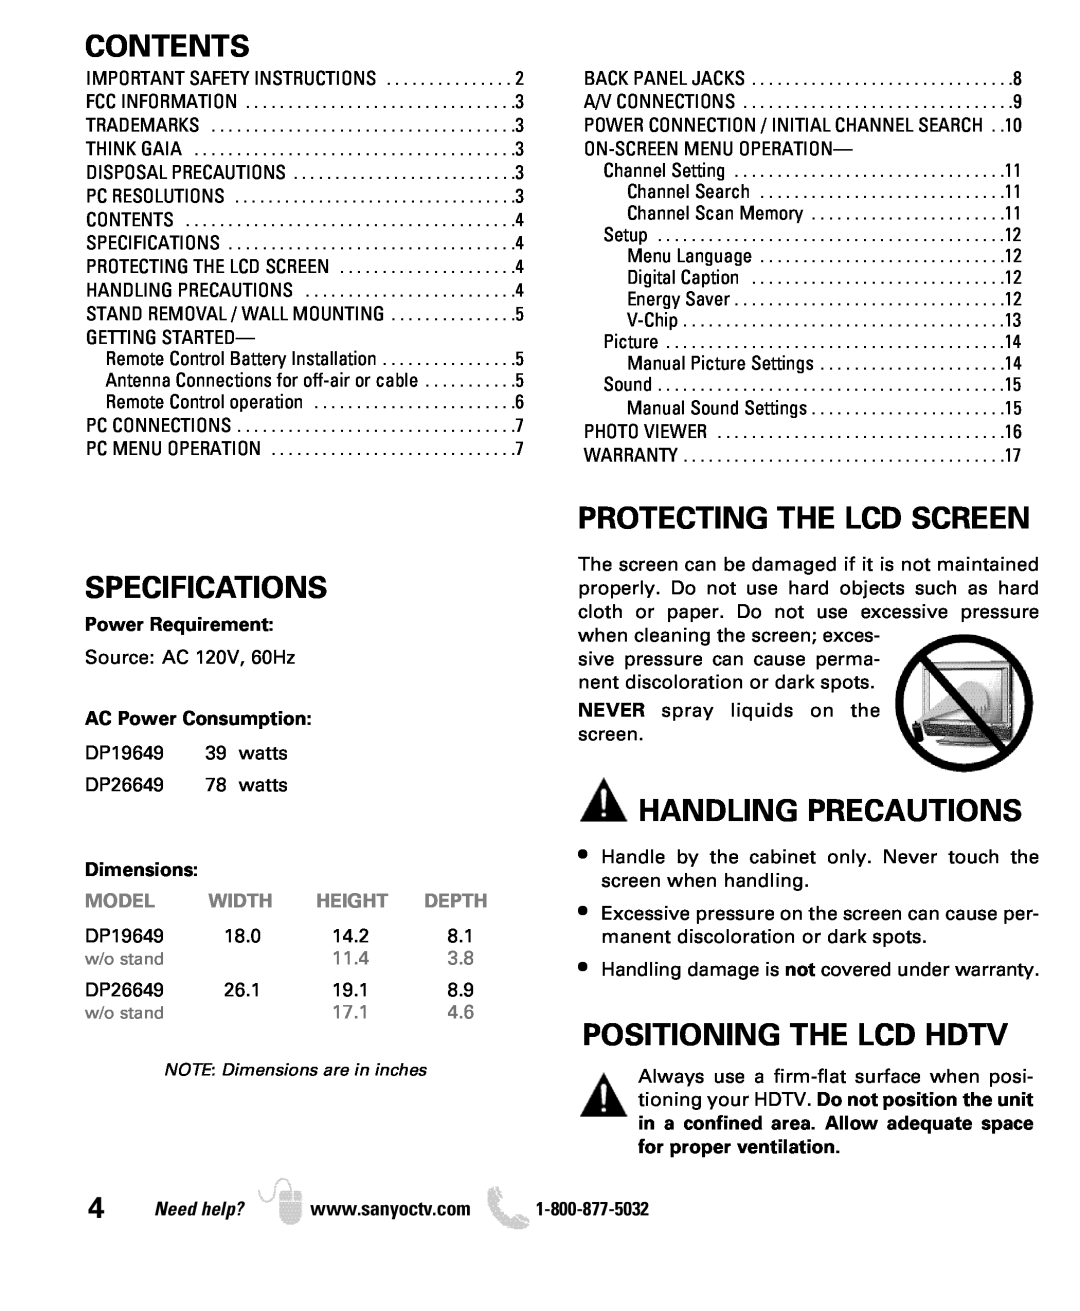 Sanyo DP26649 Contents, Specifications, Protecting The Lcd Screen, Handling Precautions, Positioning The Lcd Hdtv, Model 